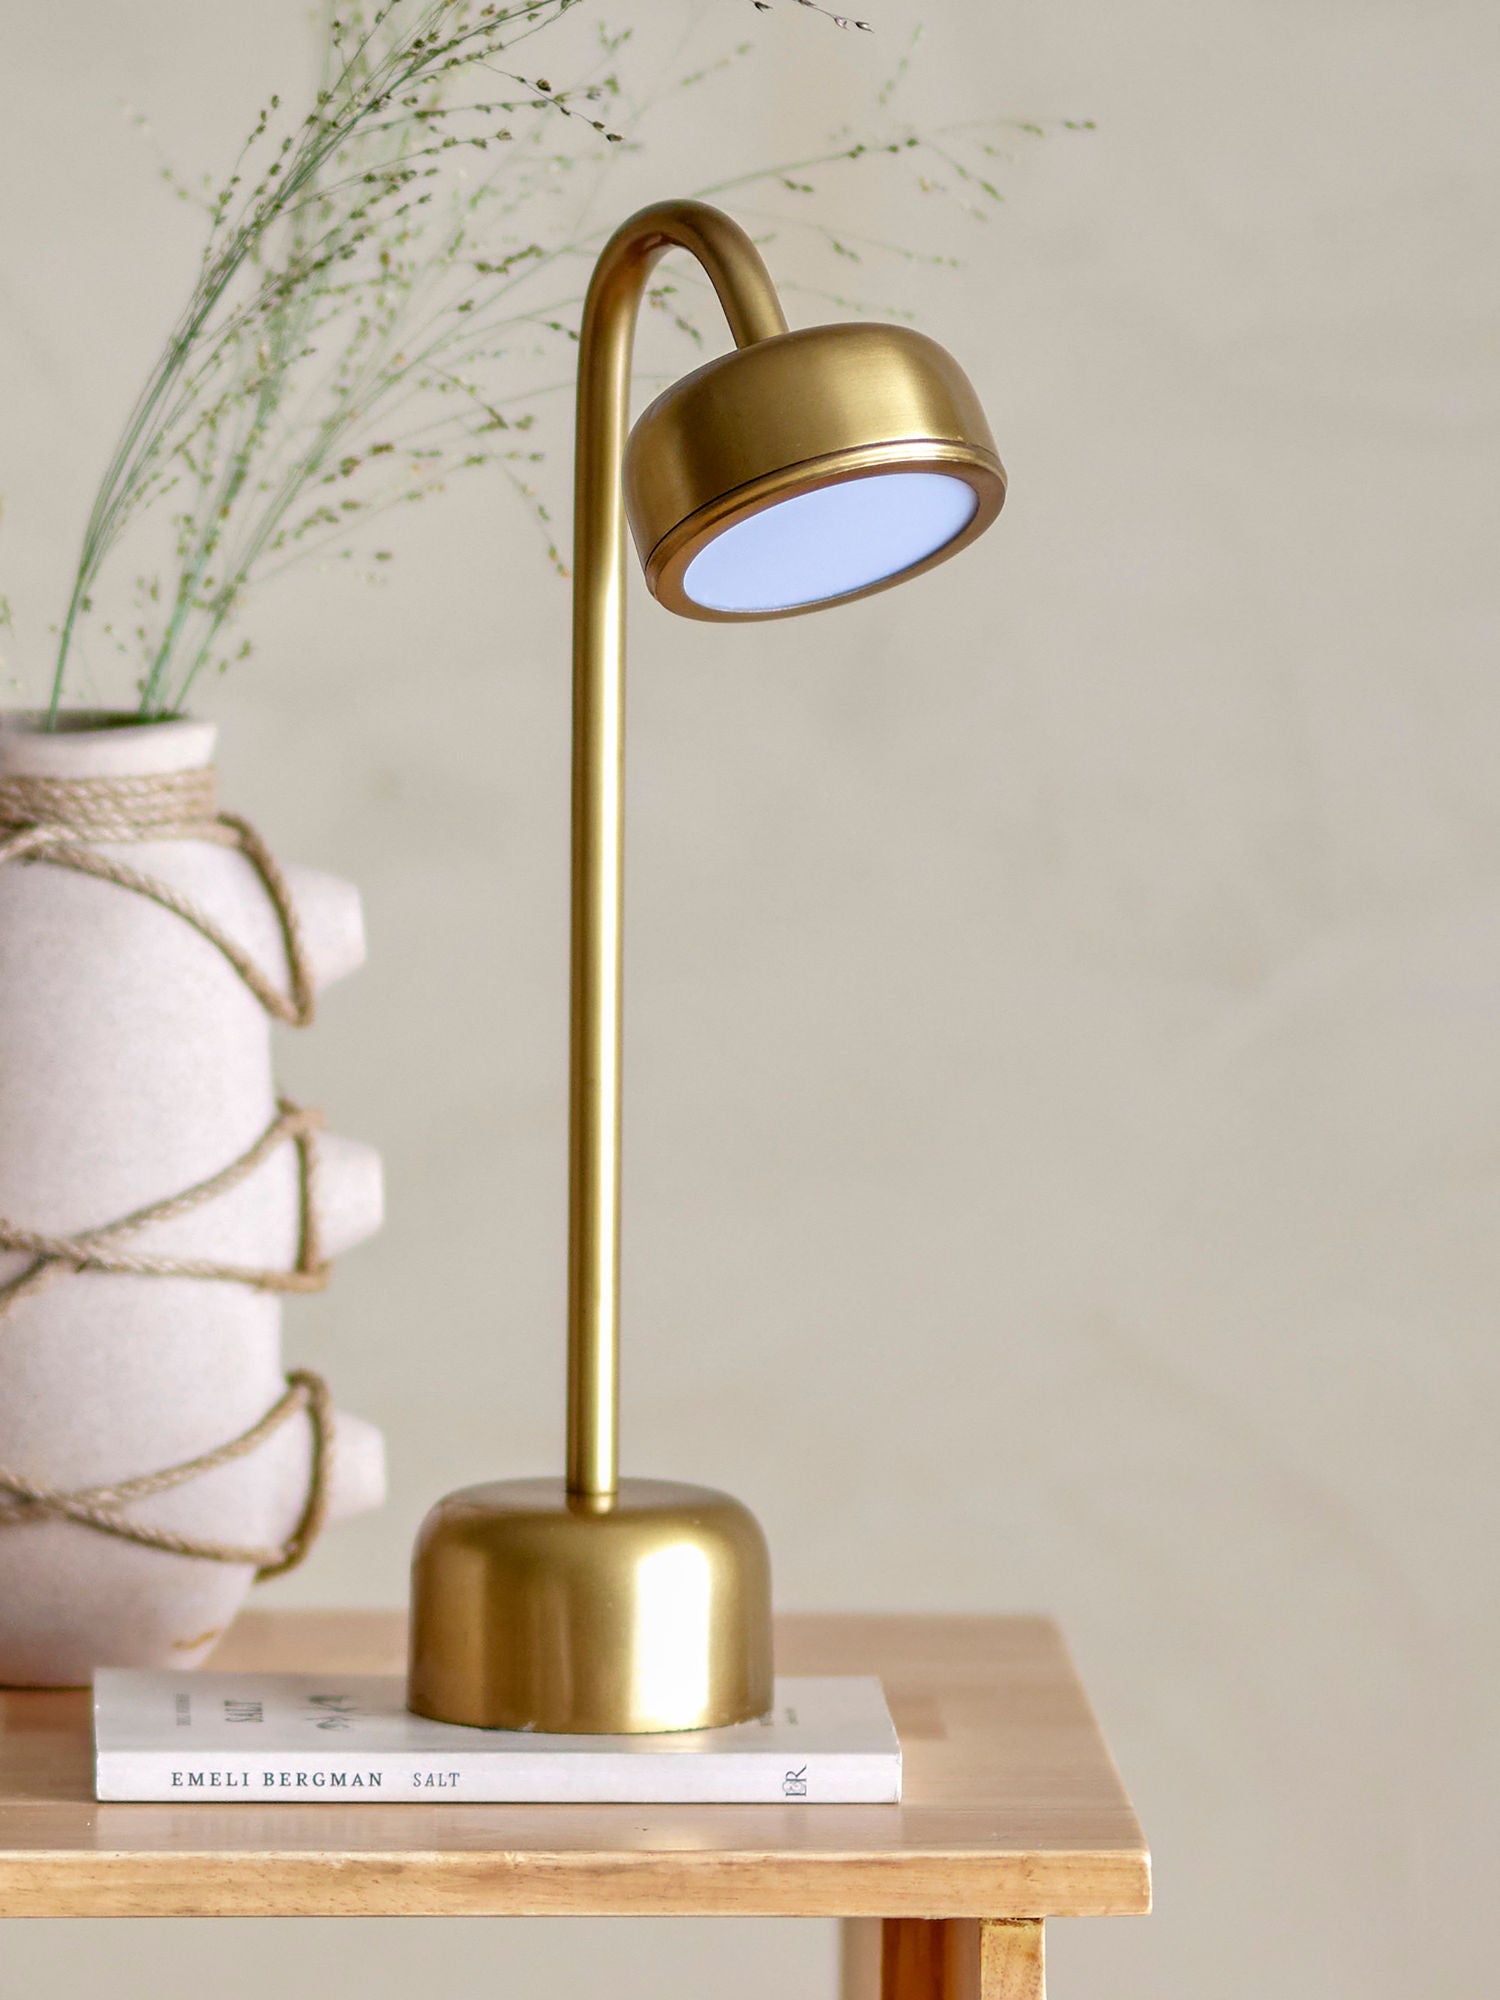 Bloomingville Nico Portable Lampe, Rechargeable, Brass, Metal